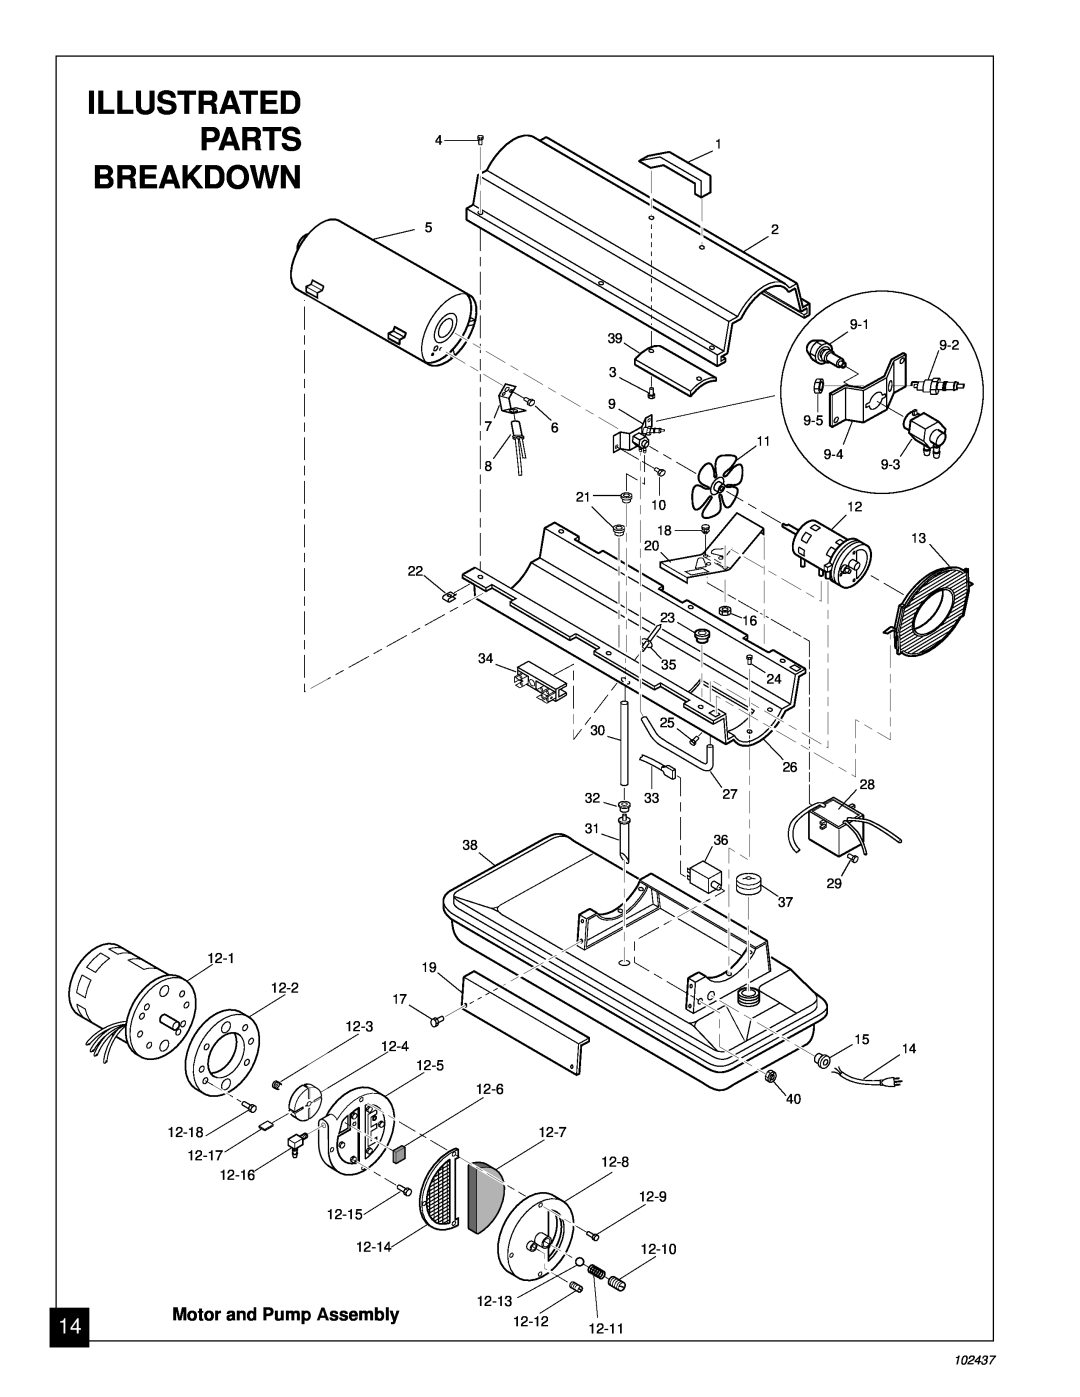 Desa PORTABLE FORCED AIR HEATERS owner manual Parts, Breakdown, Illustrated, Motor and Pump Assembly 